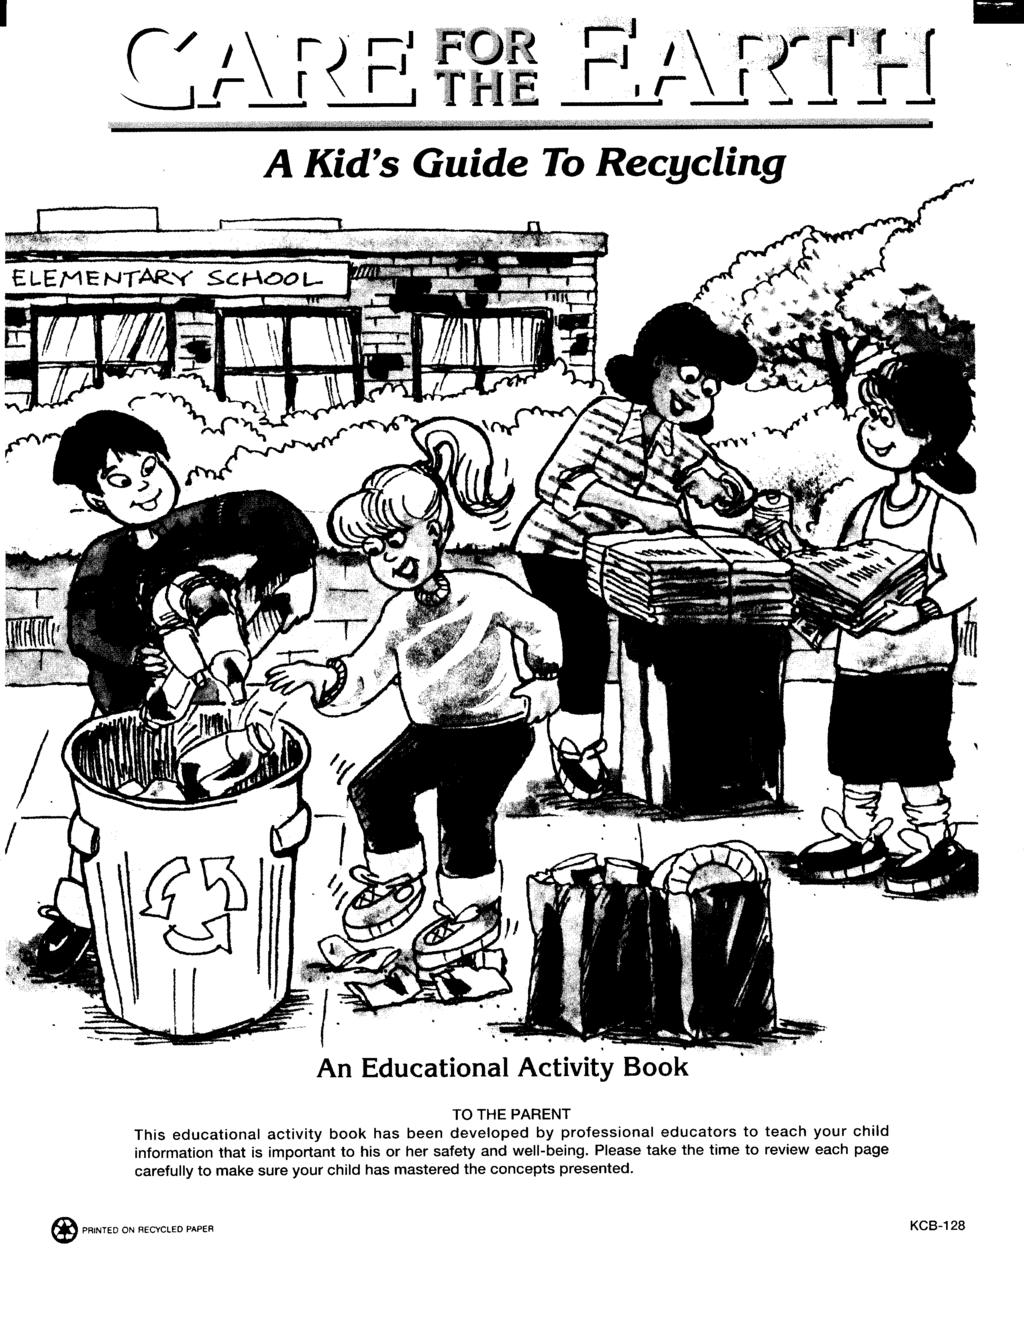 A Kid's Guide To Recycling An Educational Activity Book TO THE PARENT This educational activity book has been developed by professional educators to teach your child information that is